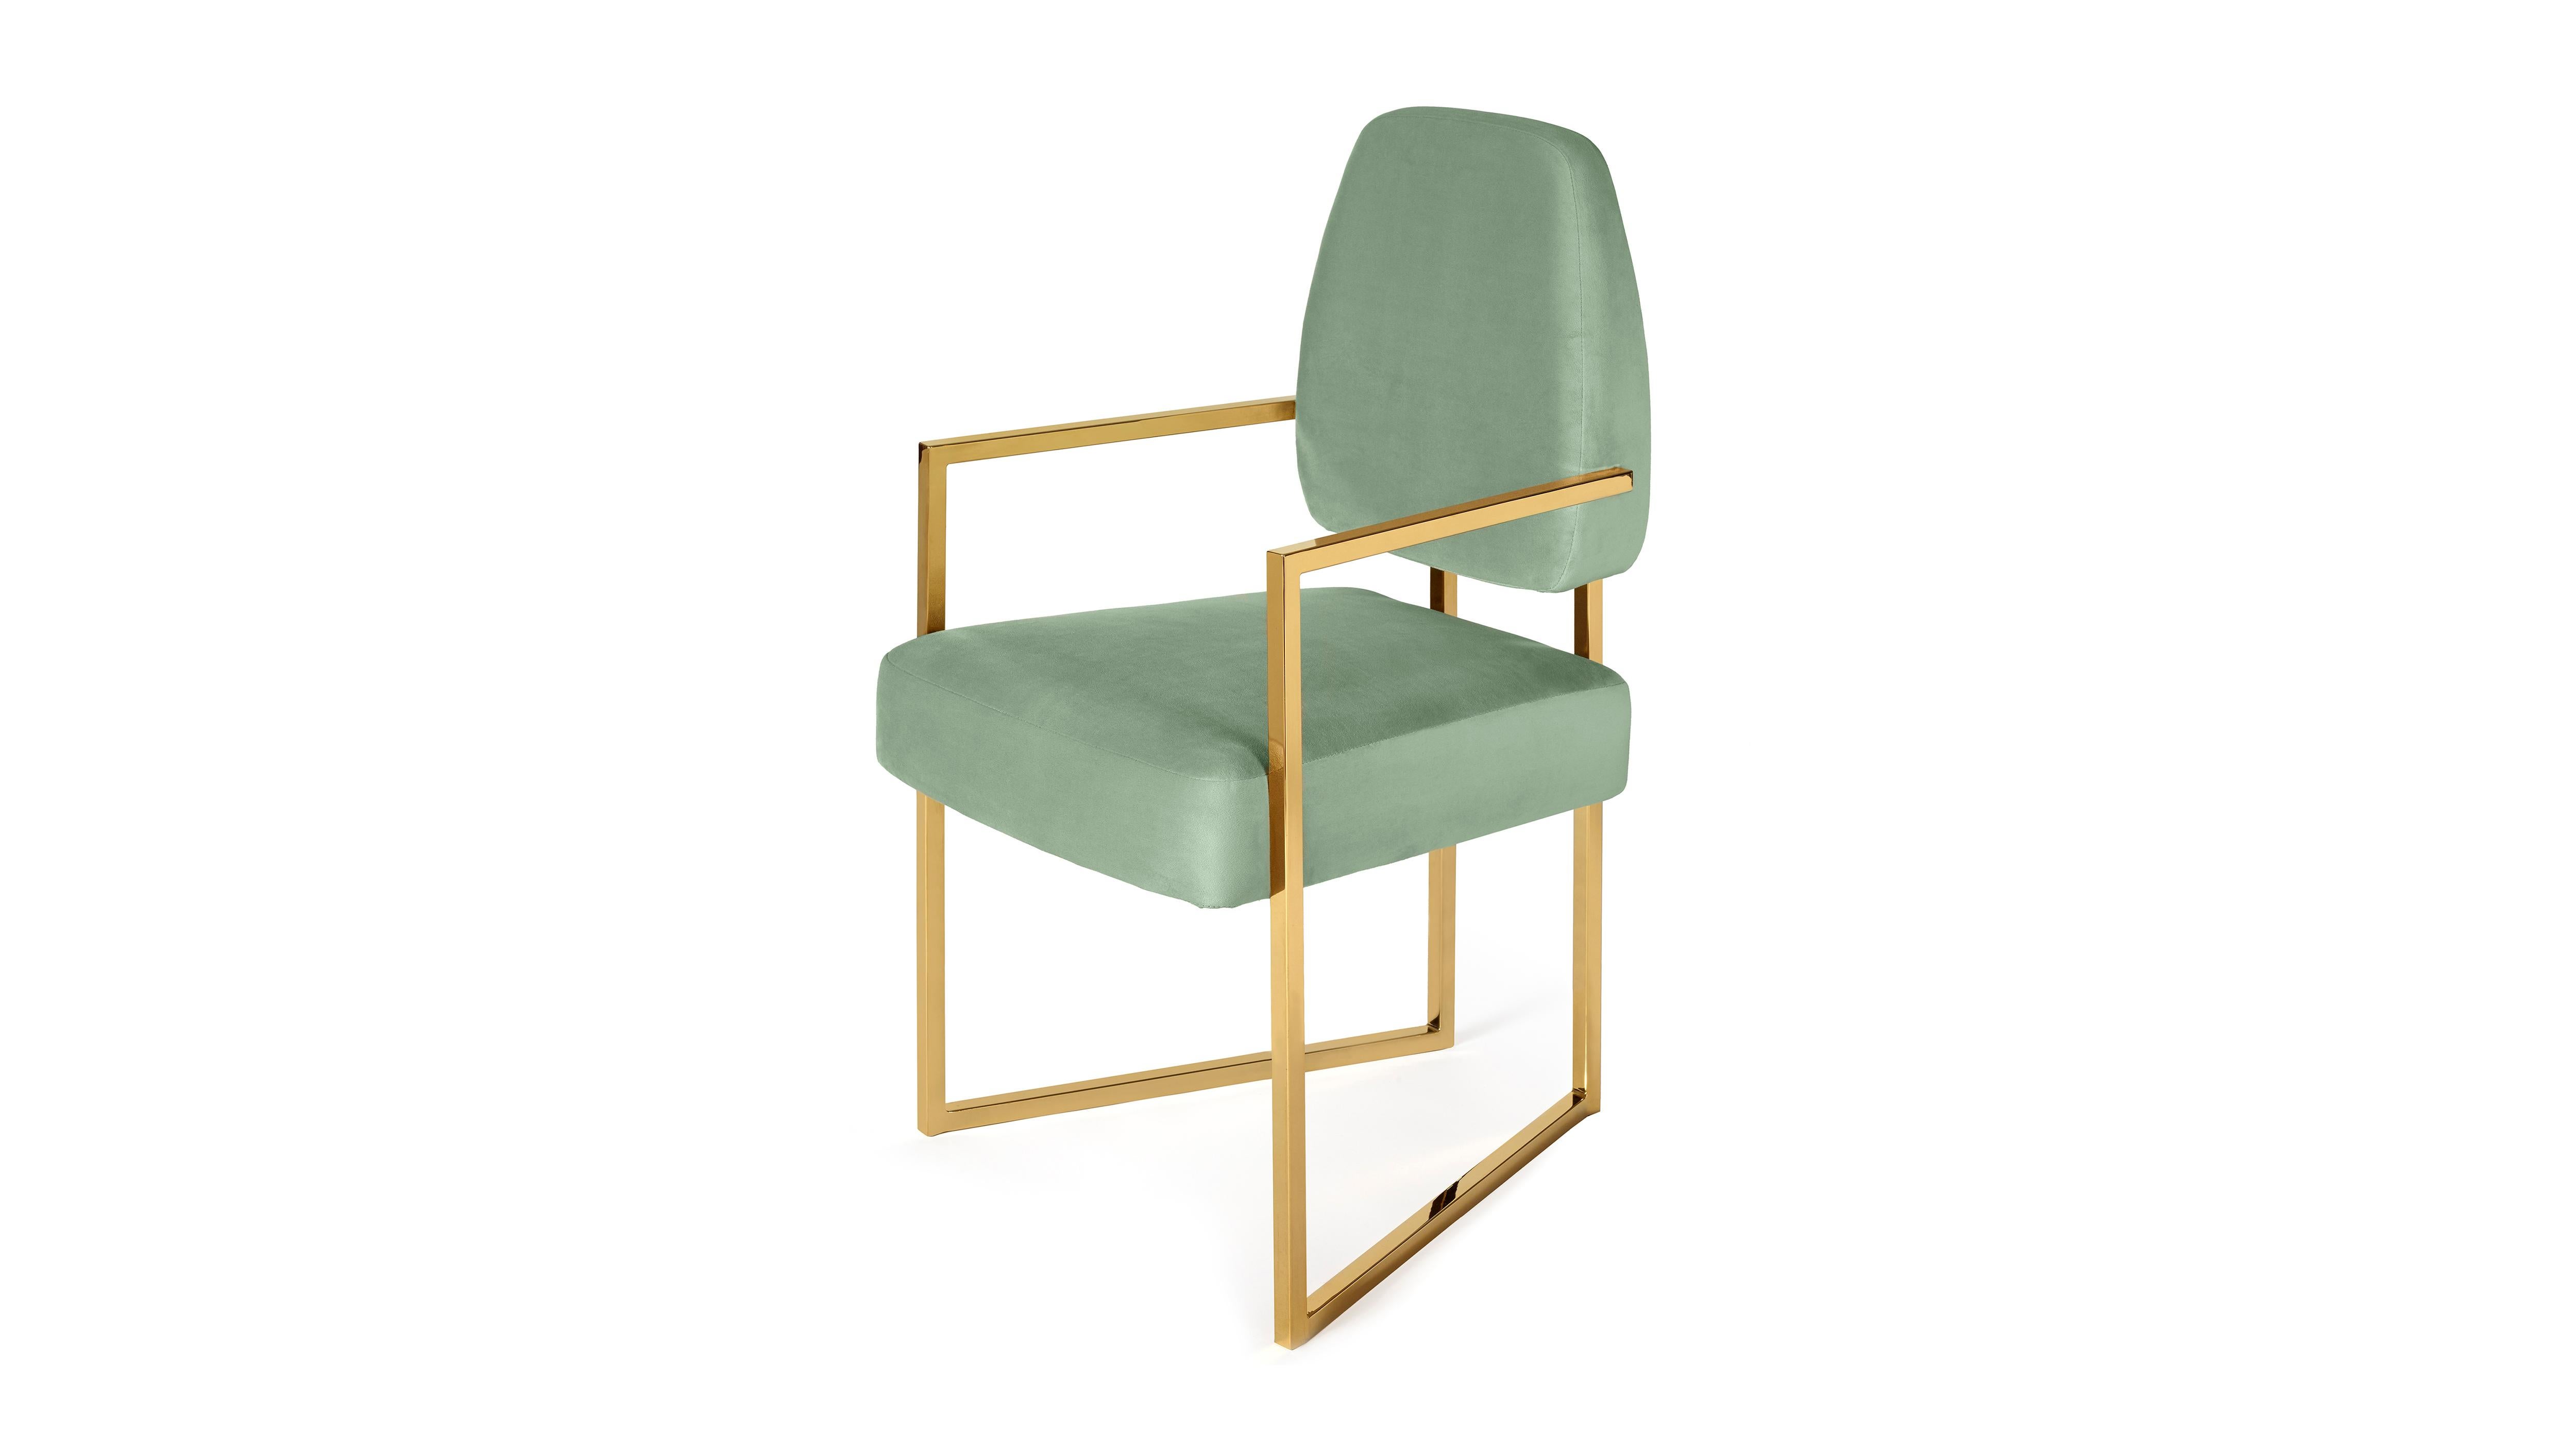 Set of 4 Perspective Dining Chair by InsidherLand
Dimensions: D 58 x W 52 x H 96 cm.
Materials: stainless steel finished with golden bath, fabric InsidherLand Cotton Velvet Ref. 7046
10 kg.
Available in different fabrics.

Our perception of space is